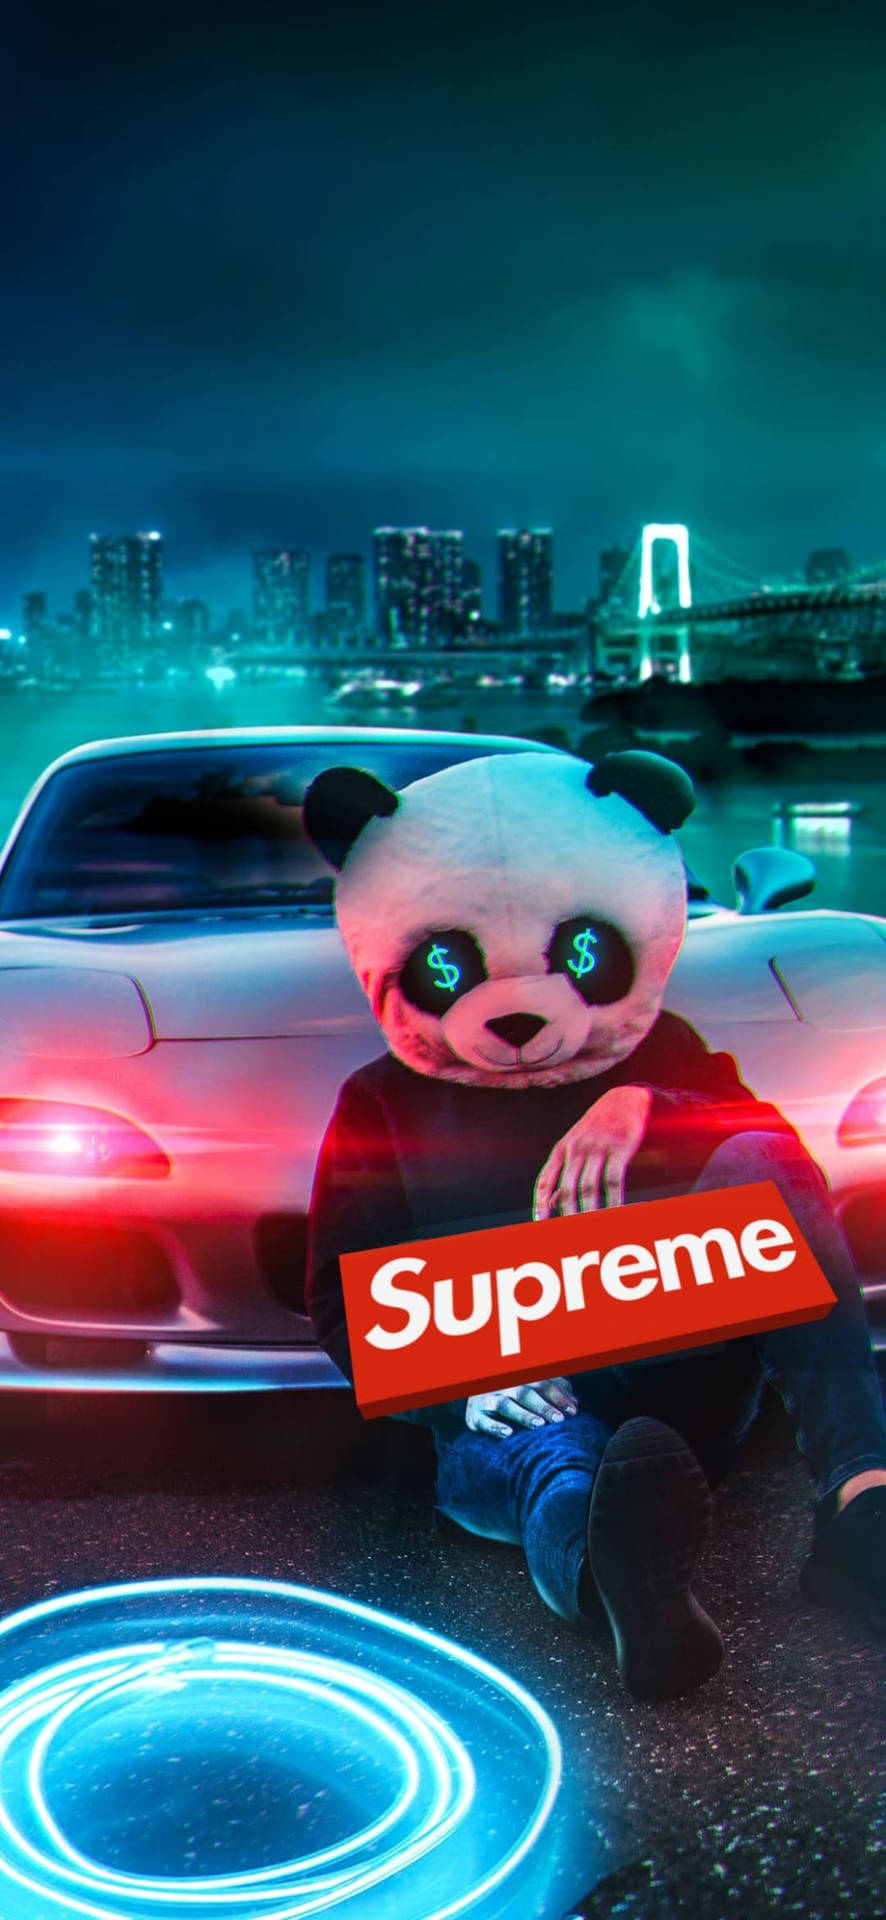 Epic Red Supreme With Panda Background